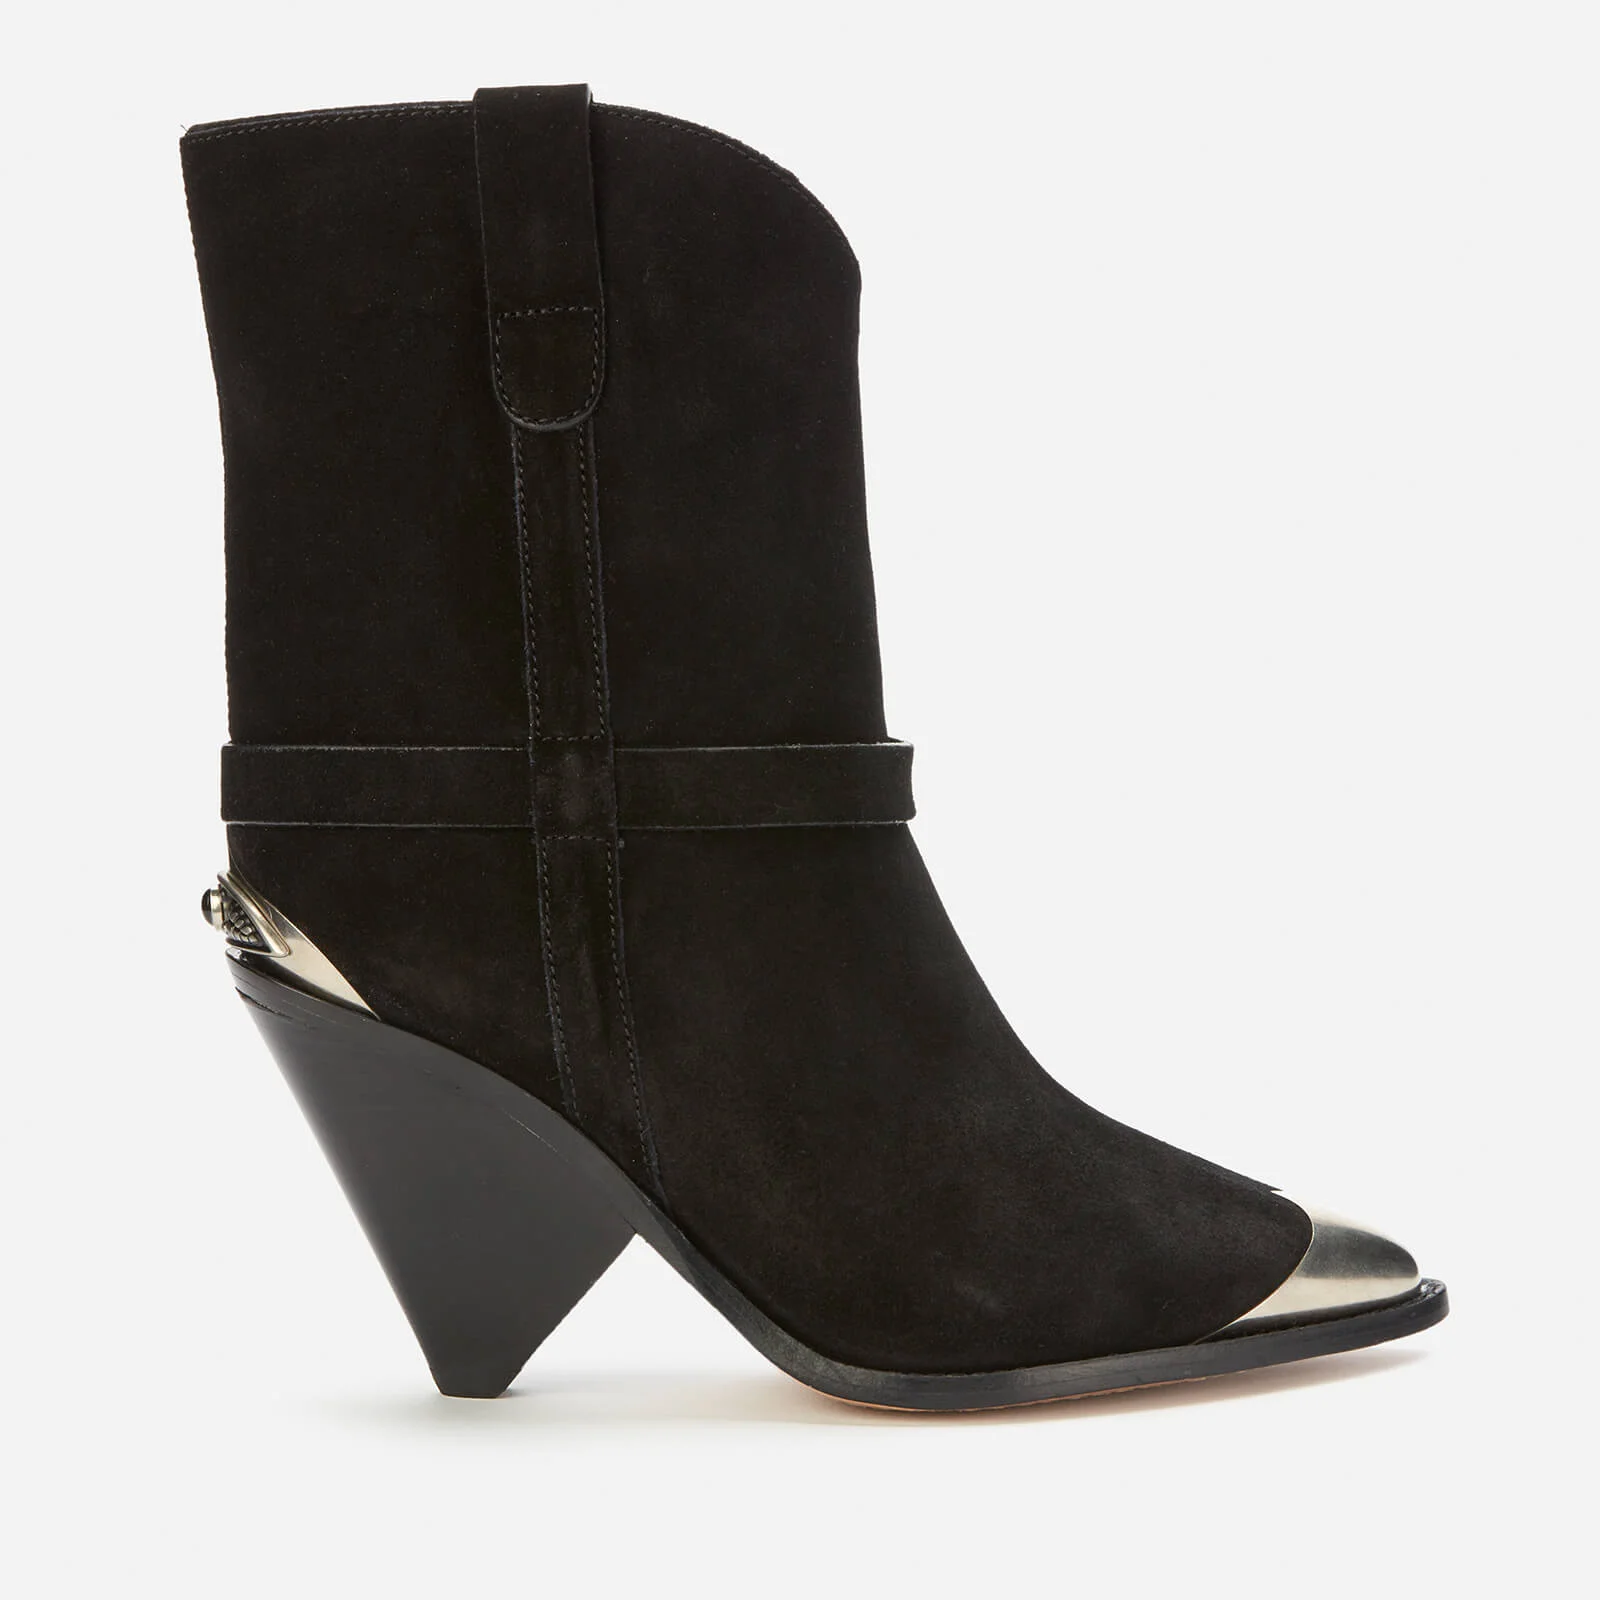 Isabel Marant Women's Lamsy Suede Heeled Ankle Boots - Black Image 1